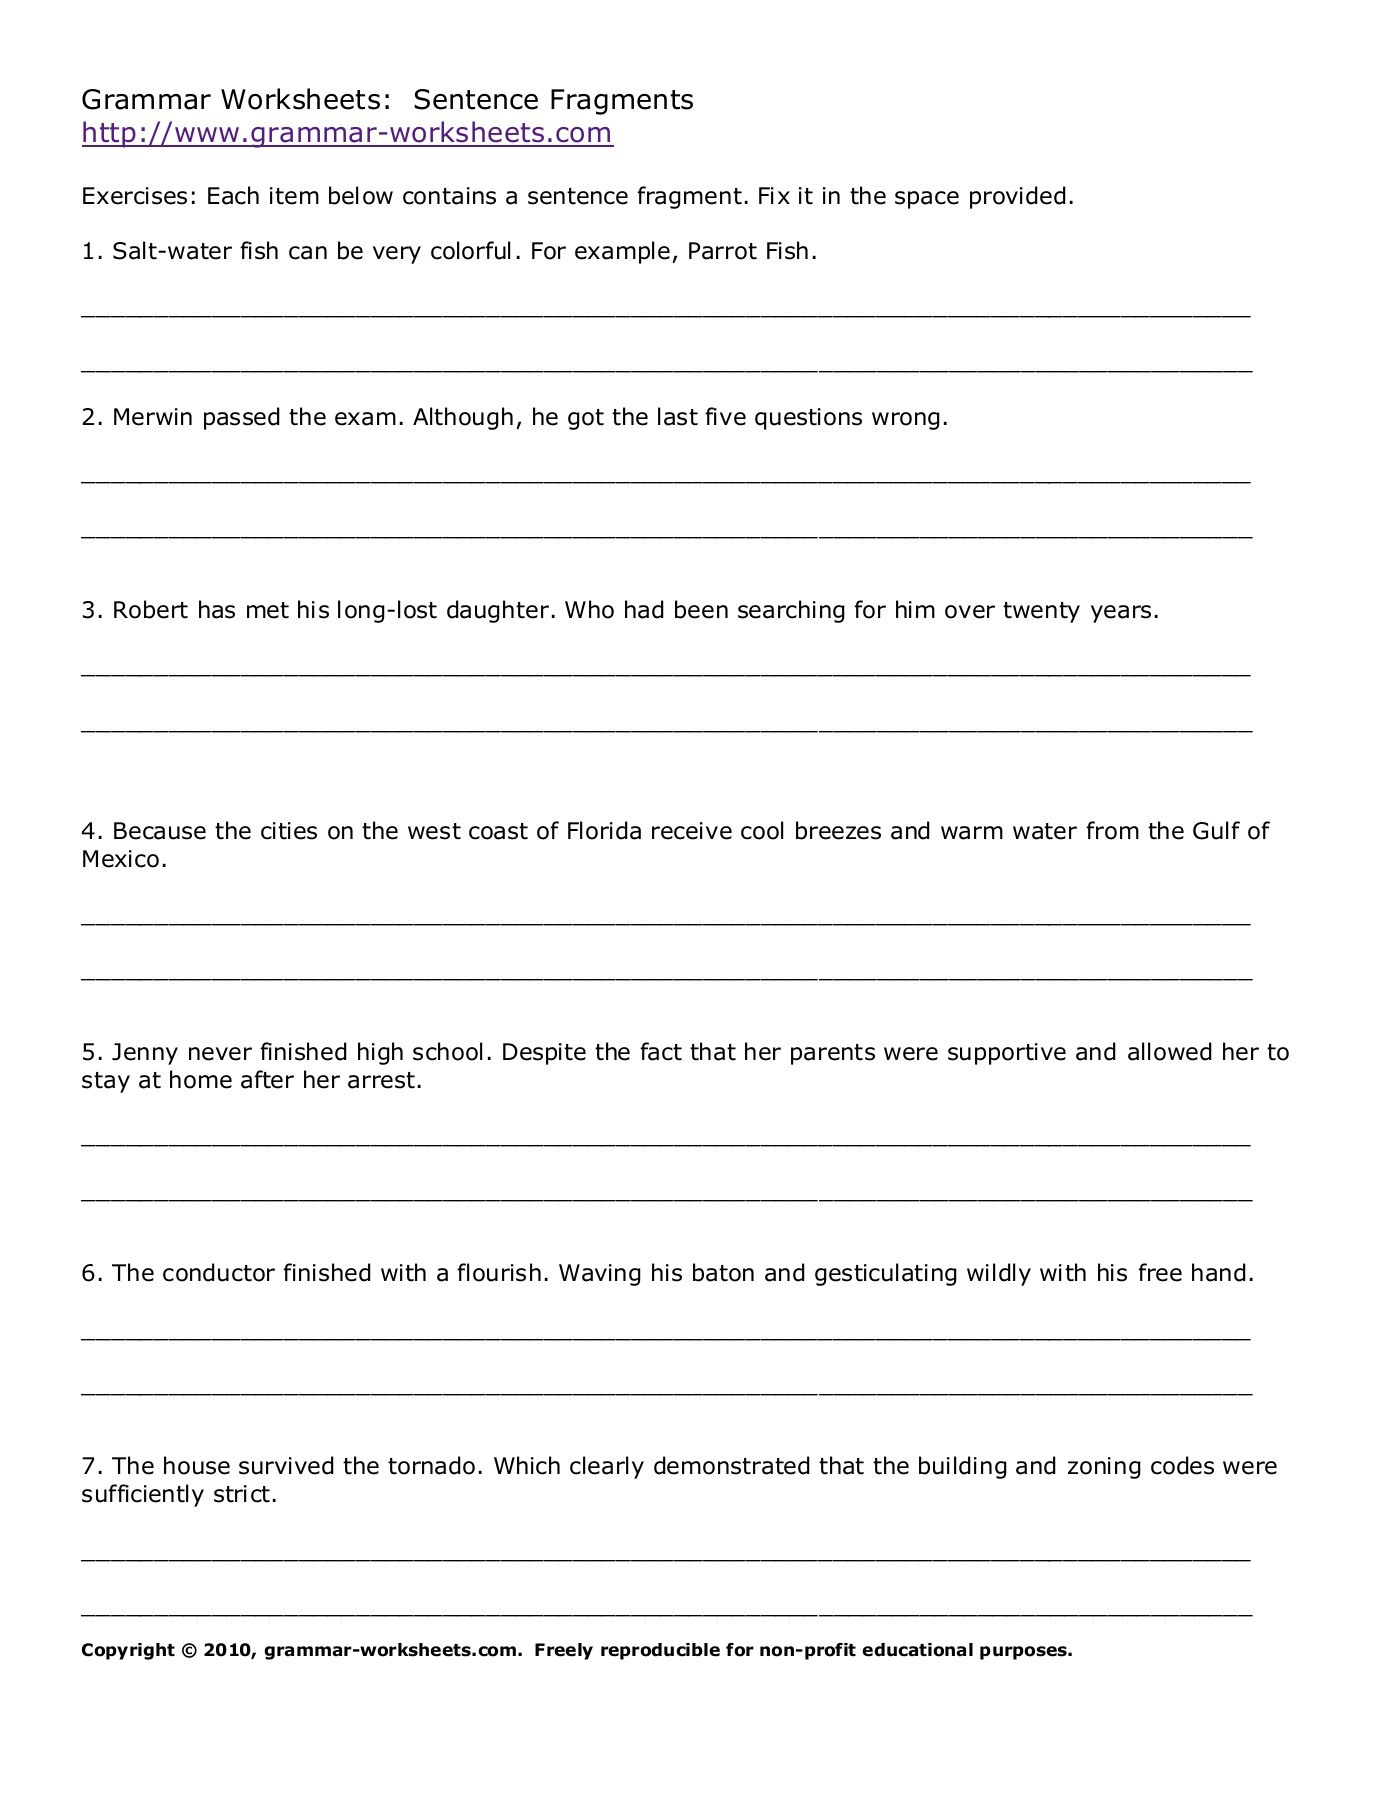 grammar-worksheets-sentence-fragments-www-weebly-pages-db-excel